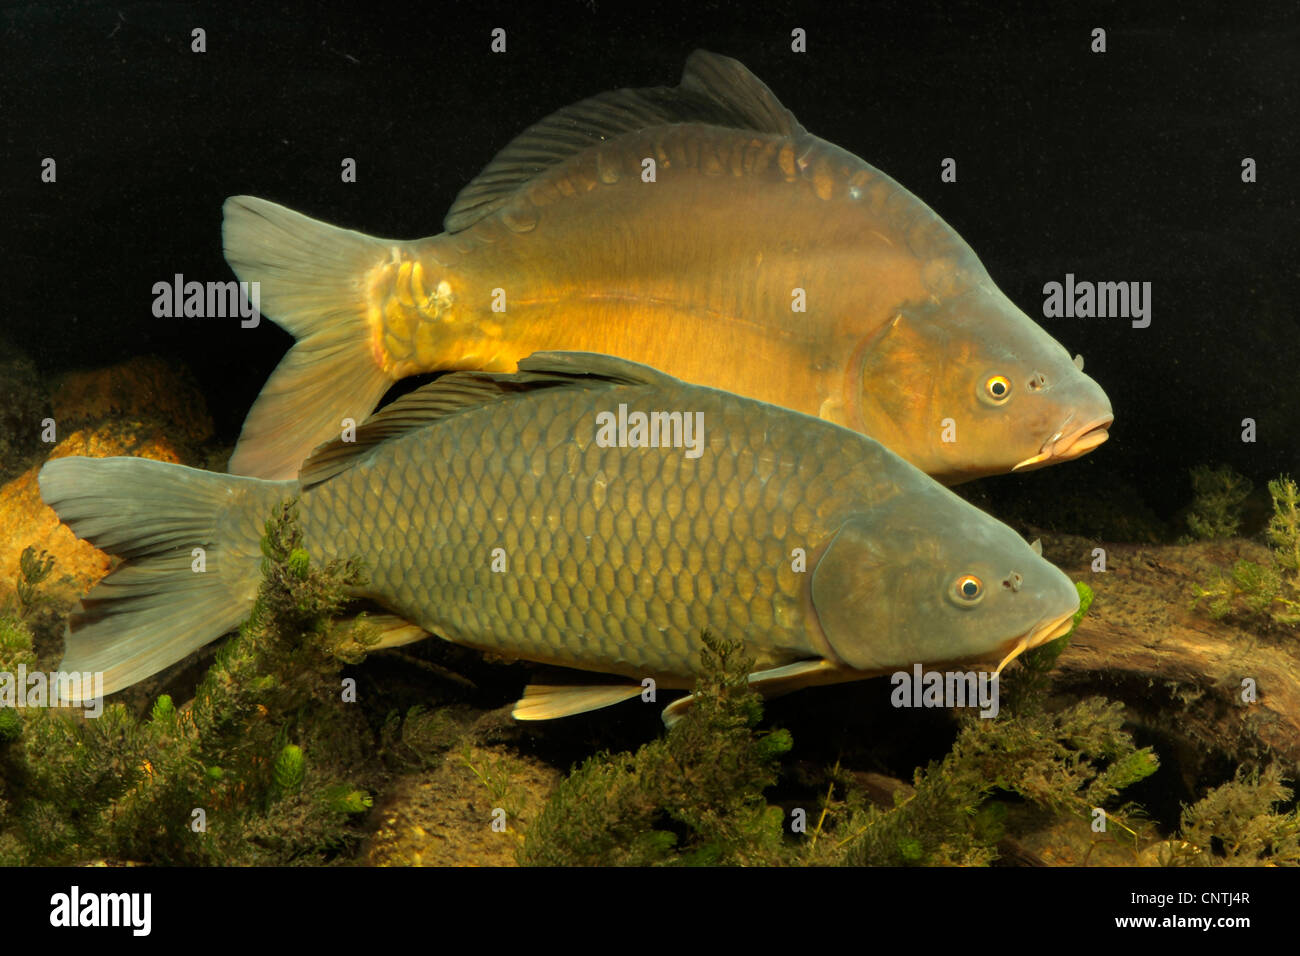 carp, common carp, European carp (Cyprinus carpio), fully scaled carp and leather carp swimming side by side close to the ground, Germany, Oberpfalz Stock Photo